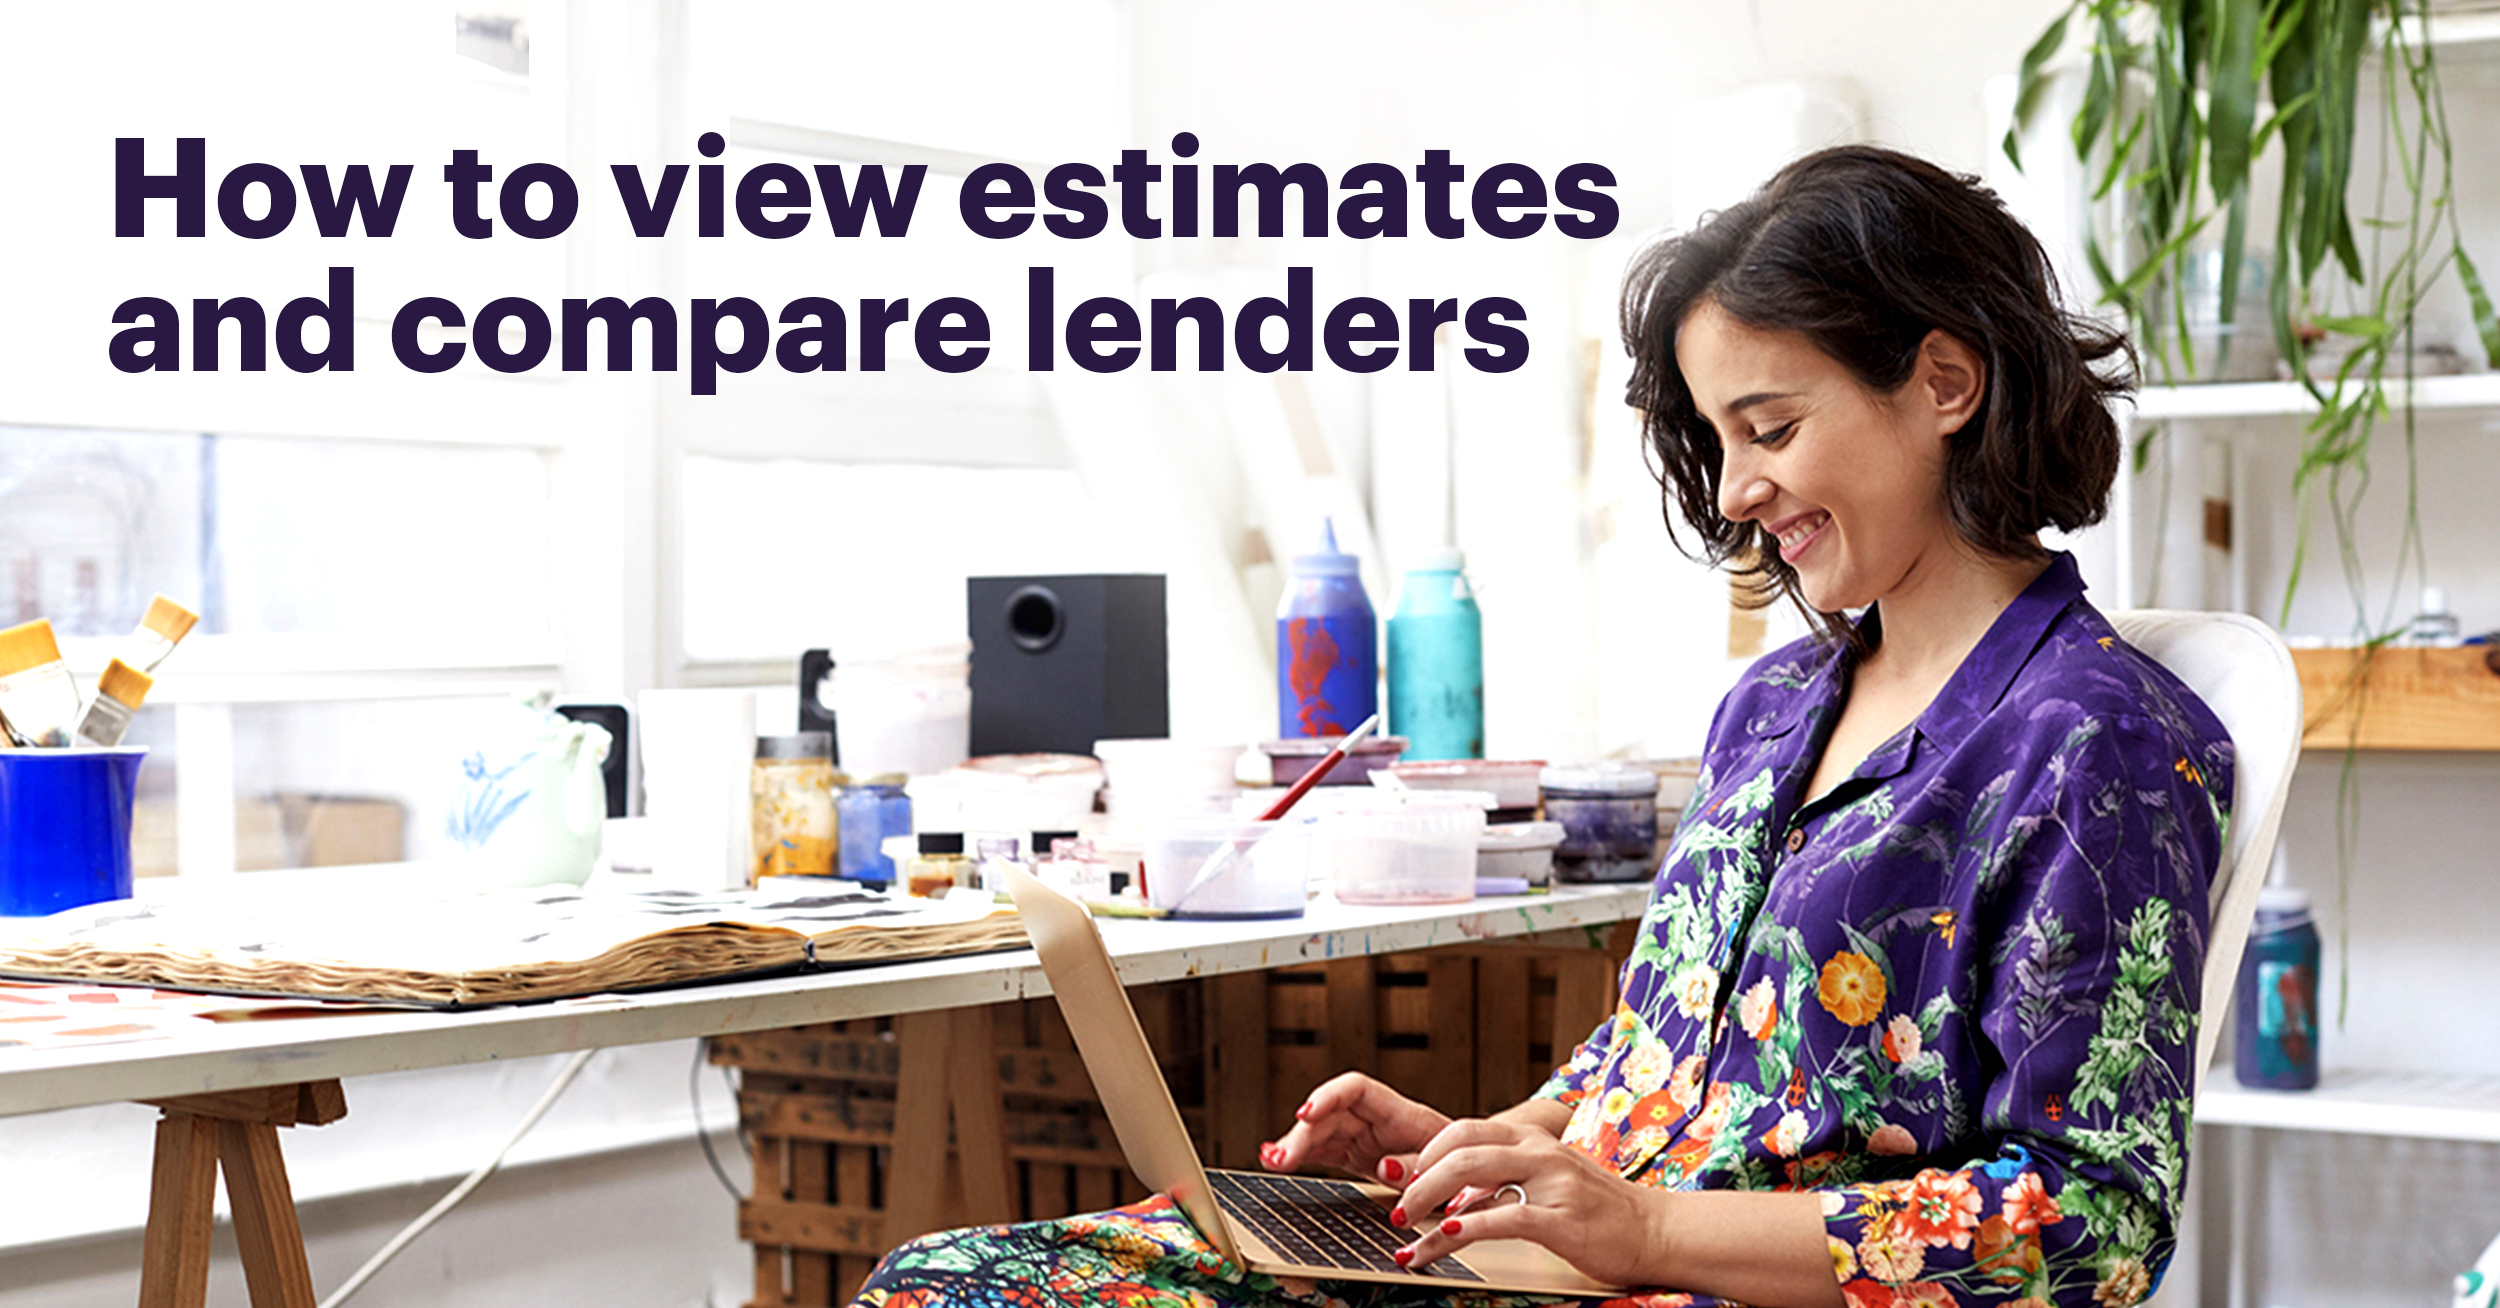 Woman with Laptop and Text that States How to View Estimates and Compare Lenders